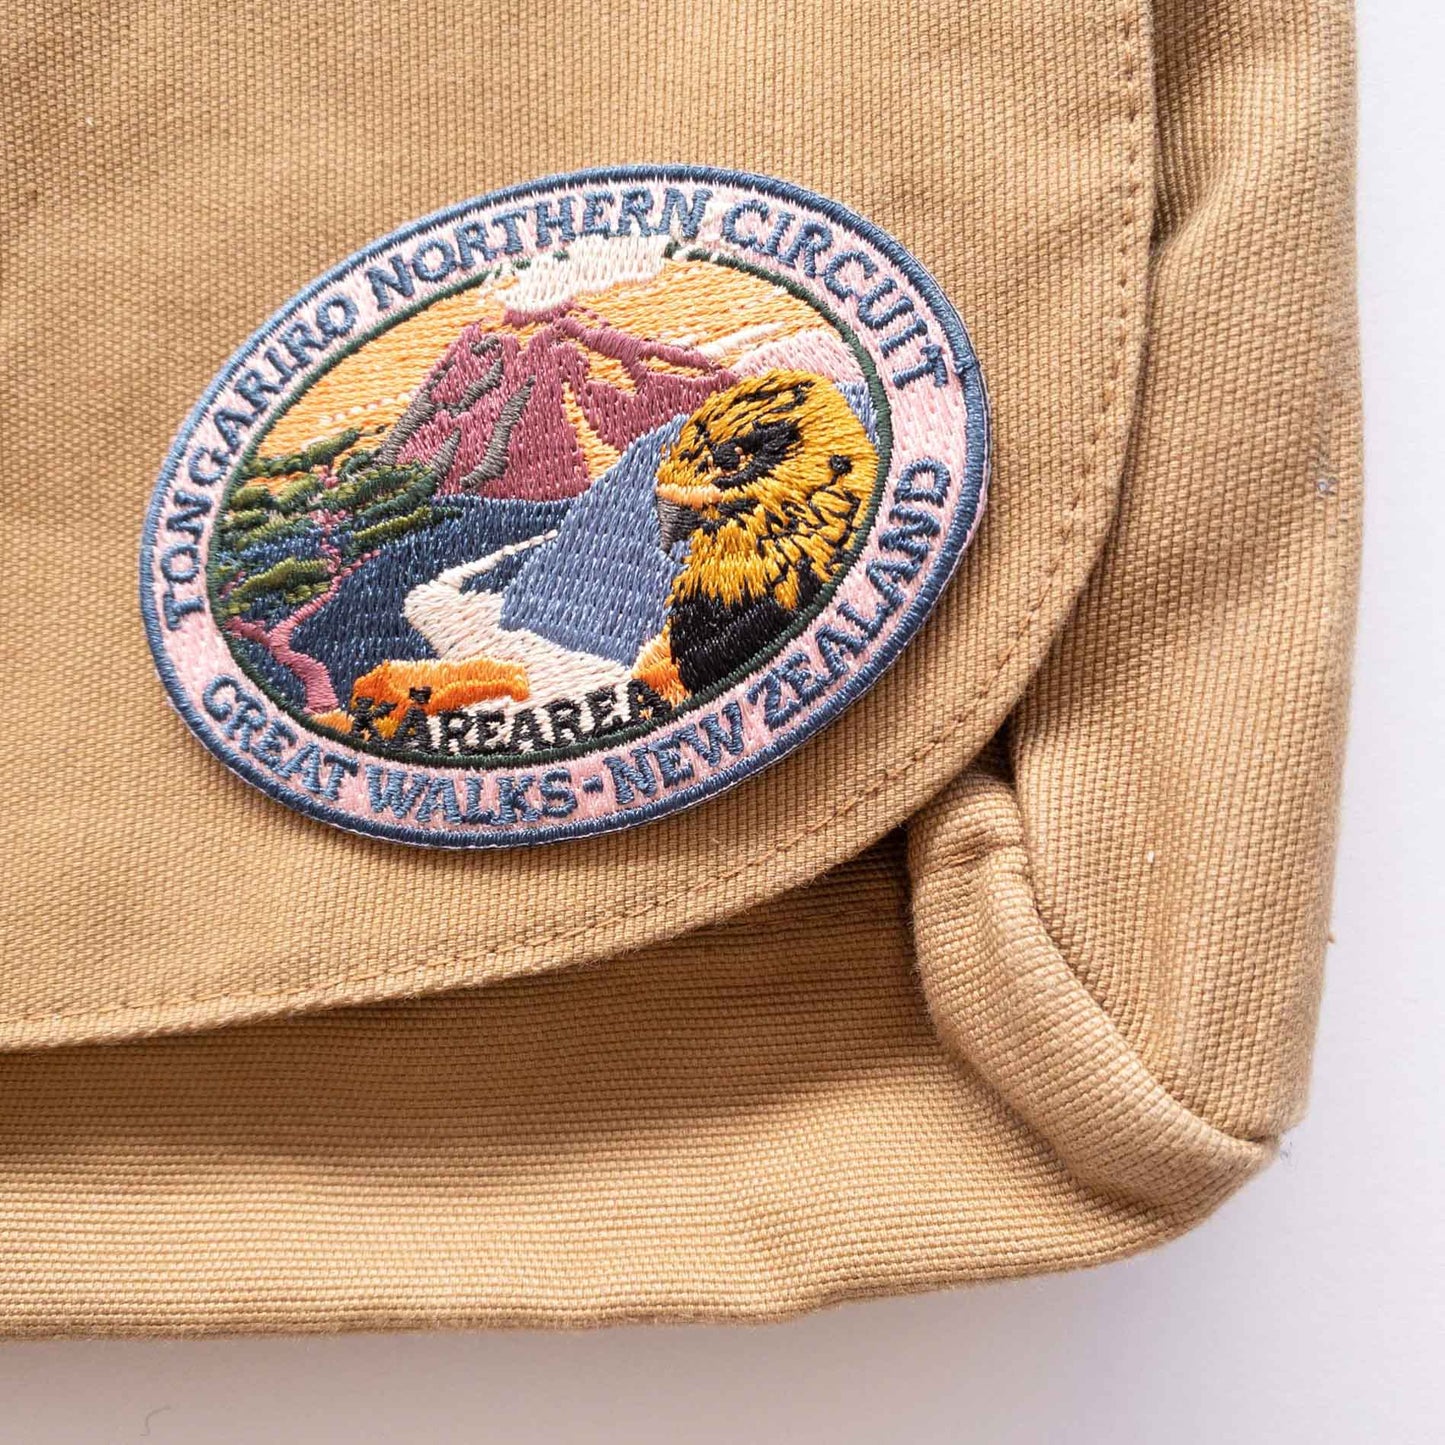 Oval, embroidered Tongaririo Northern Circuit Track patch, with a karearea/falcon, purple active volcano peak and orange sky, on a brown canvas bag.